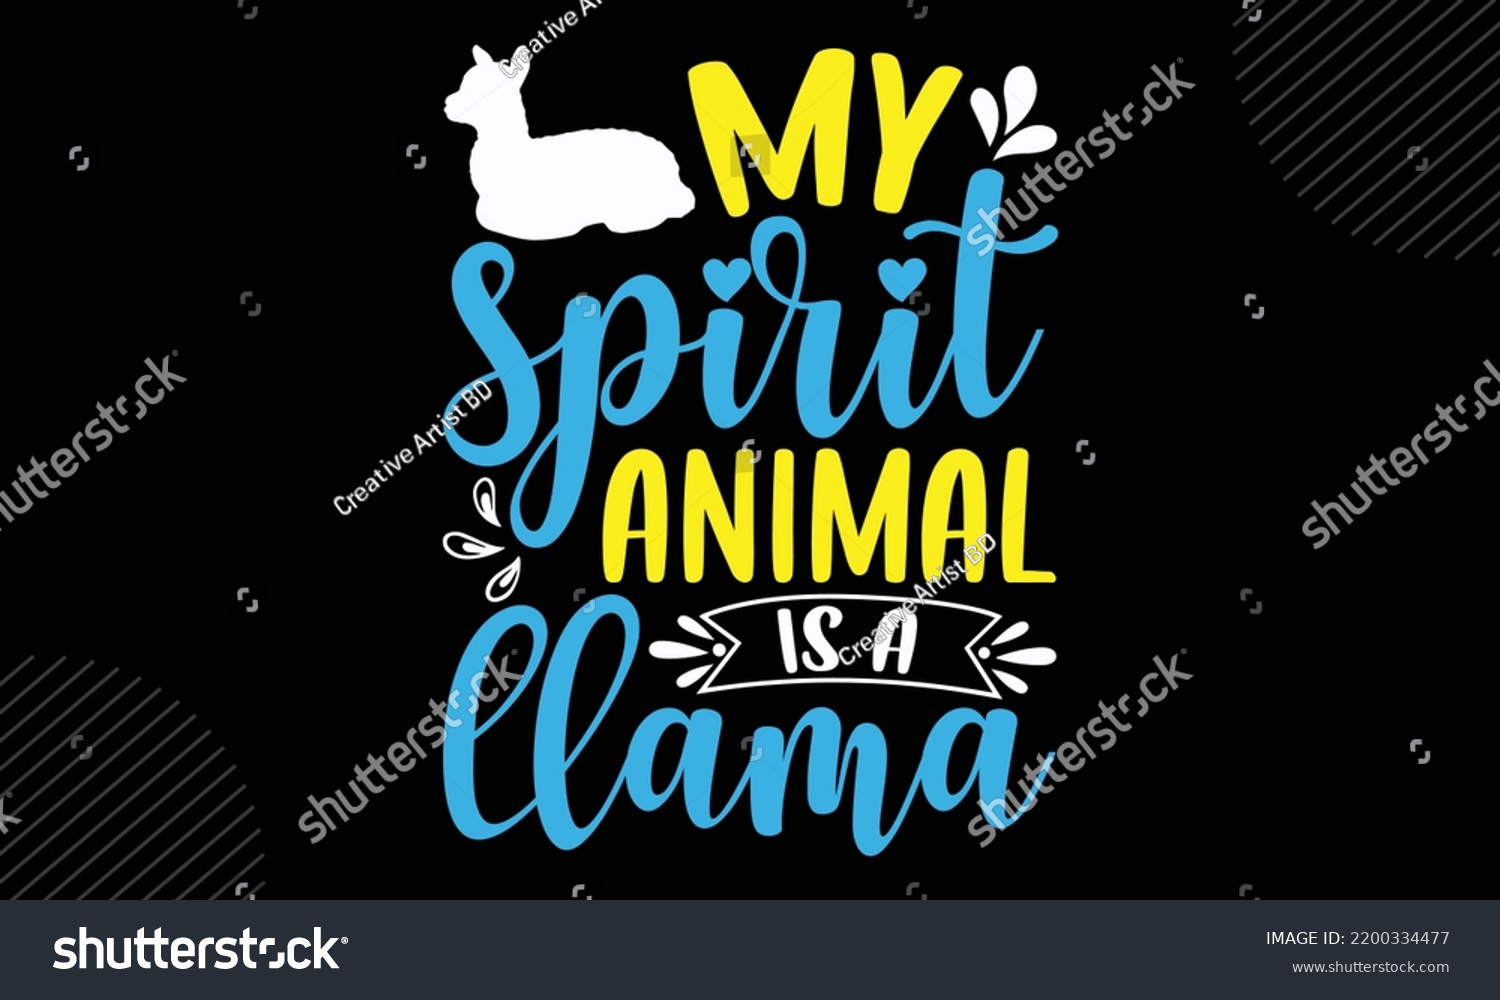 SVG of My Spirit Animal Is A Llama - Llama T shirt Design, Hand drawn vintage illustration with hand-lettering and decoration elements, Cut Files for Cricut Svg, Digital Download svg